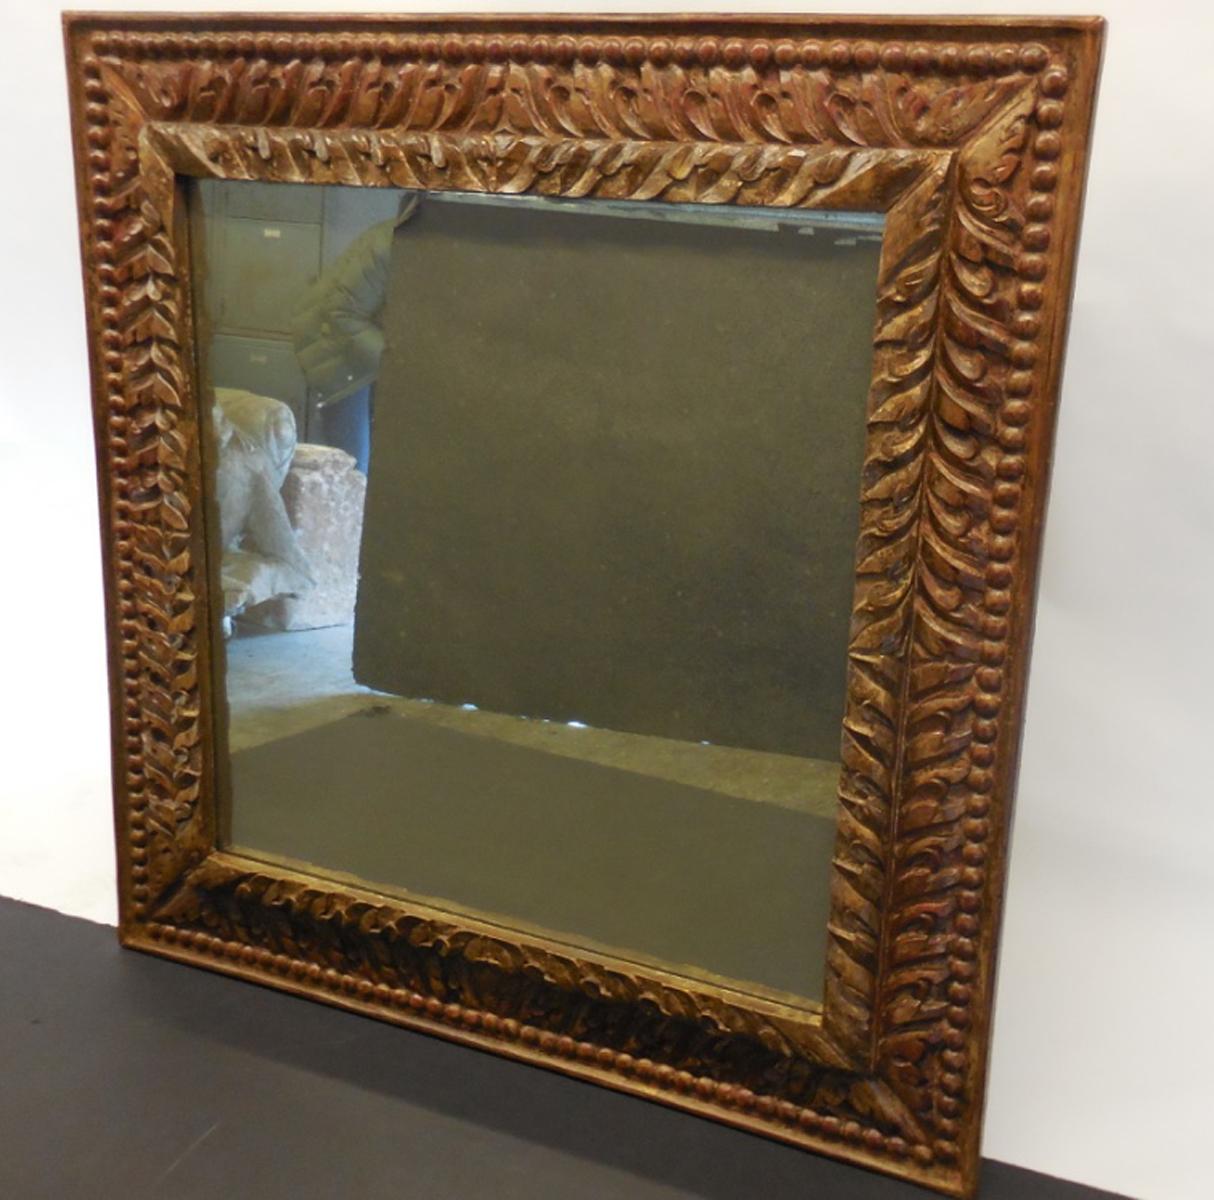 Hand carved and hand finished mirror with layers of gesso and paint. Aged mirror glass.